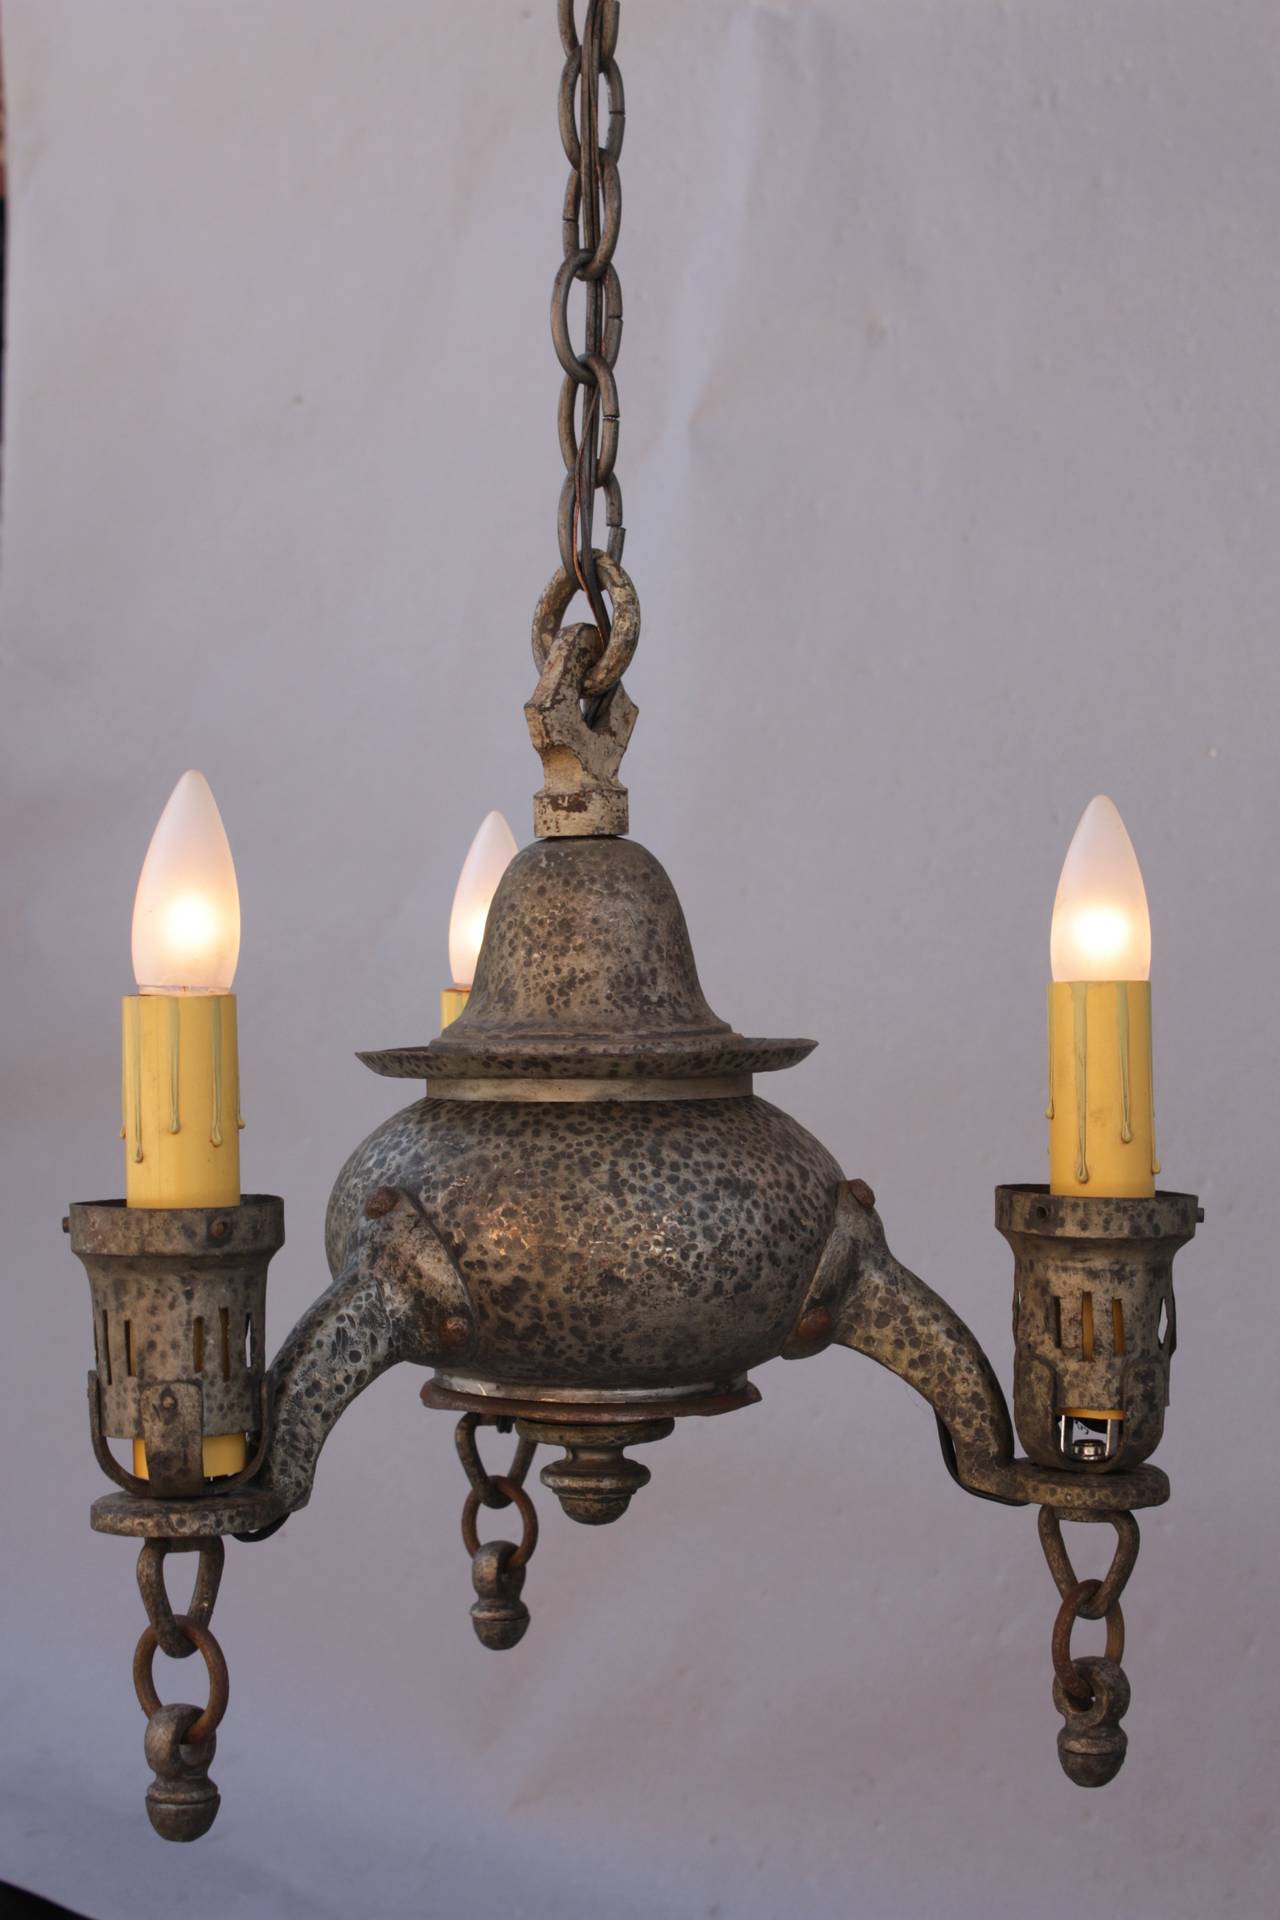 Compact 1920's chandelier with hammered texture. Measures: 16